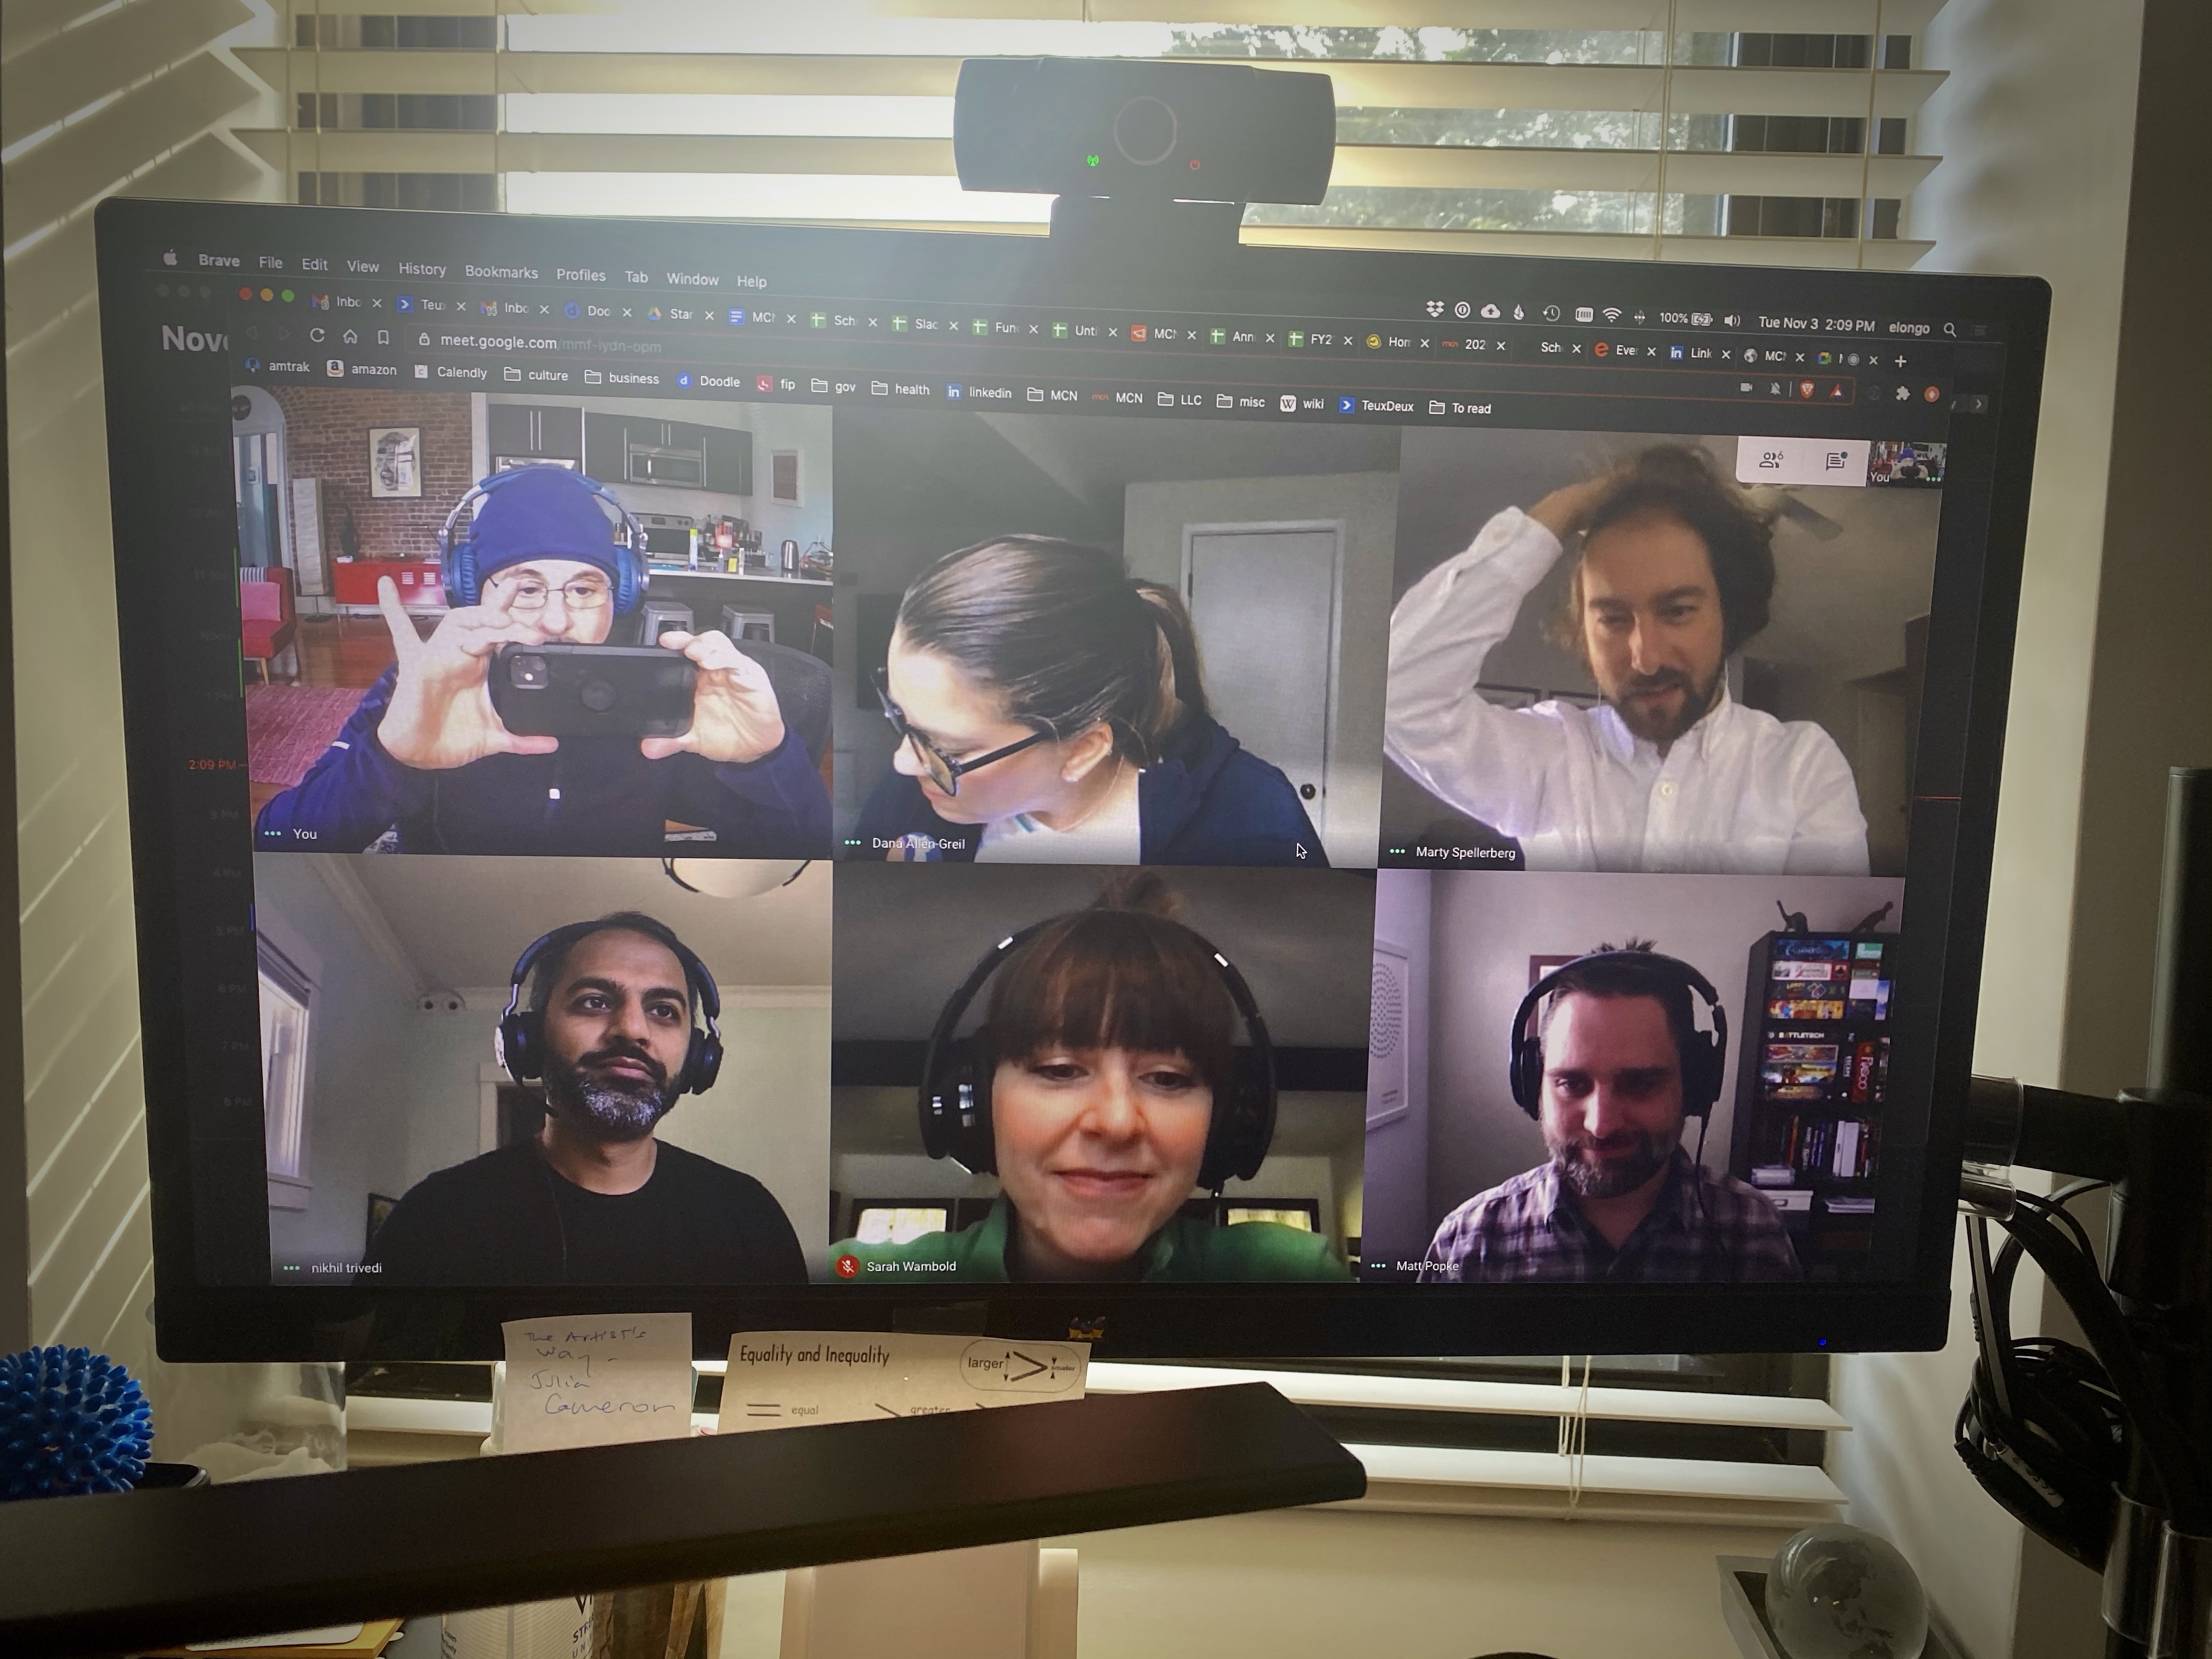 The six presenters of the MCN panel discussion on a Google Hangouts tiled screen during a planning call